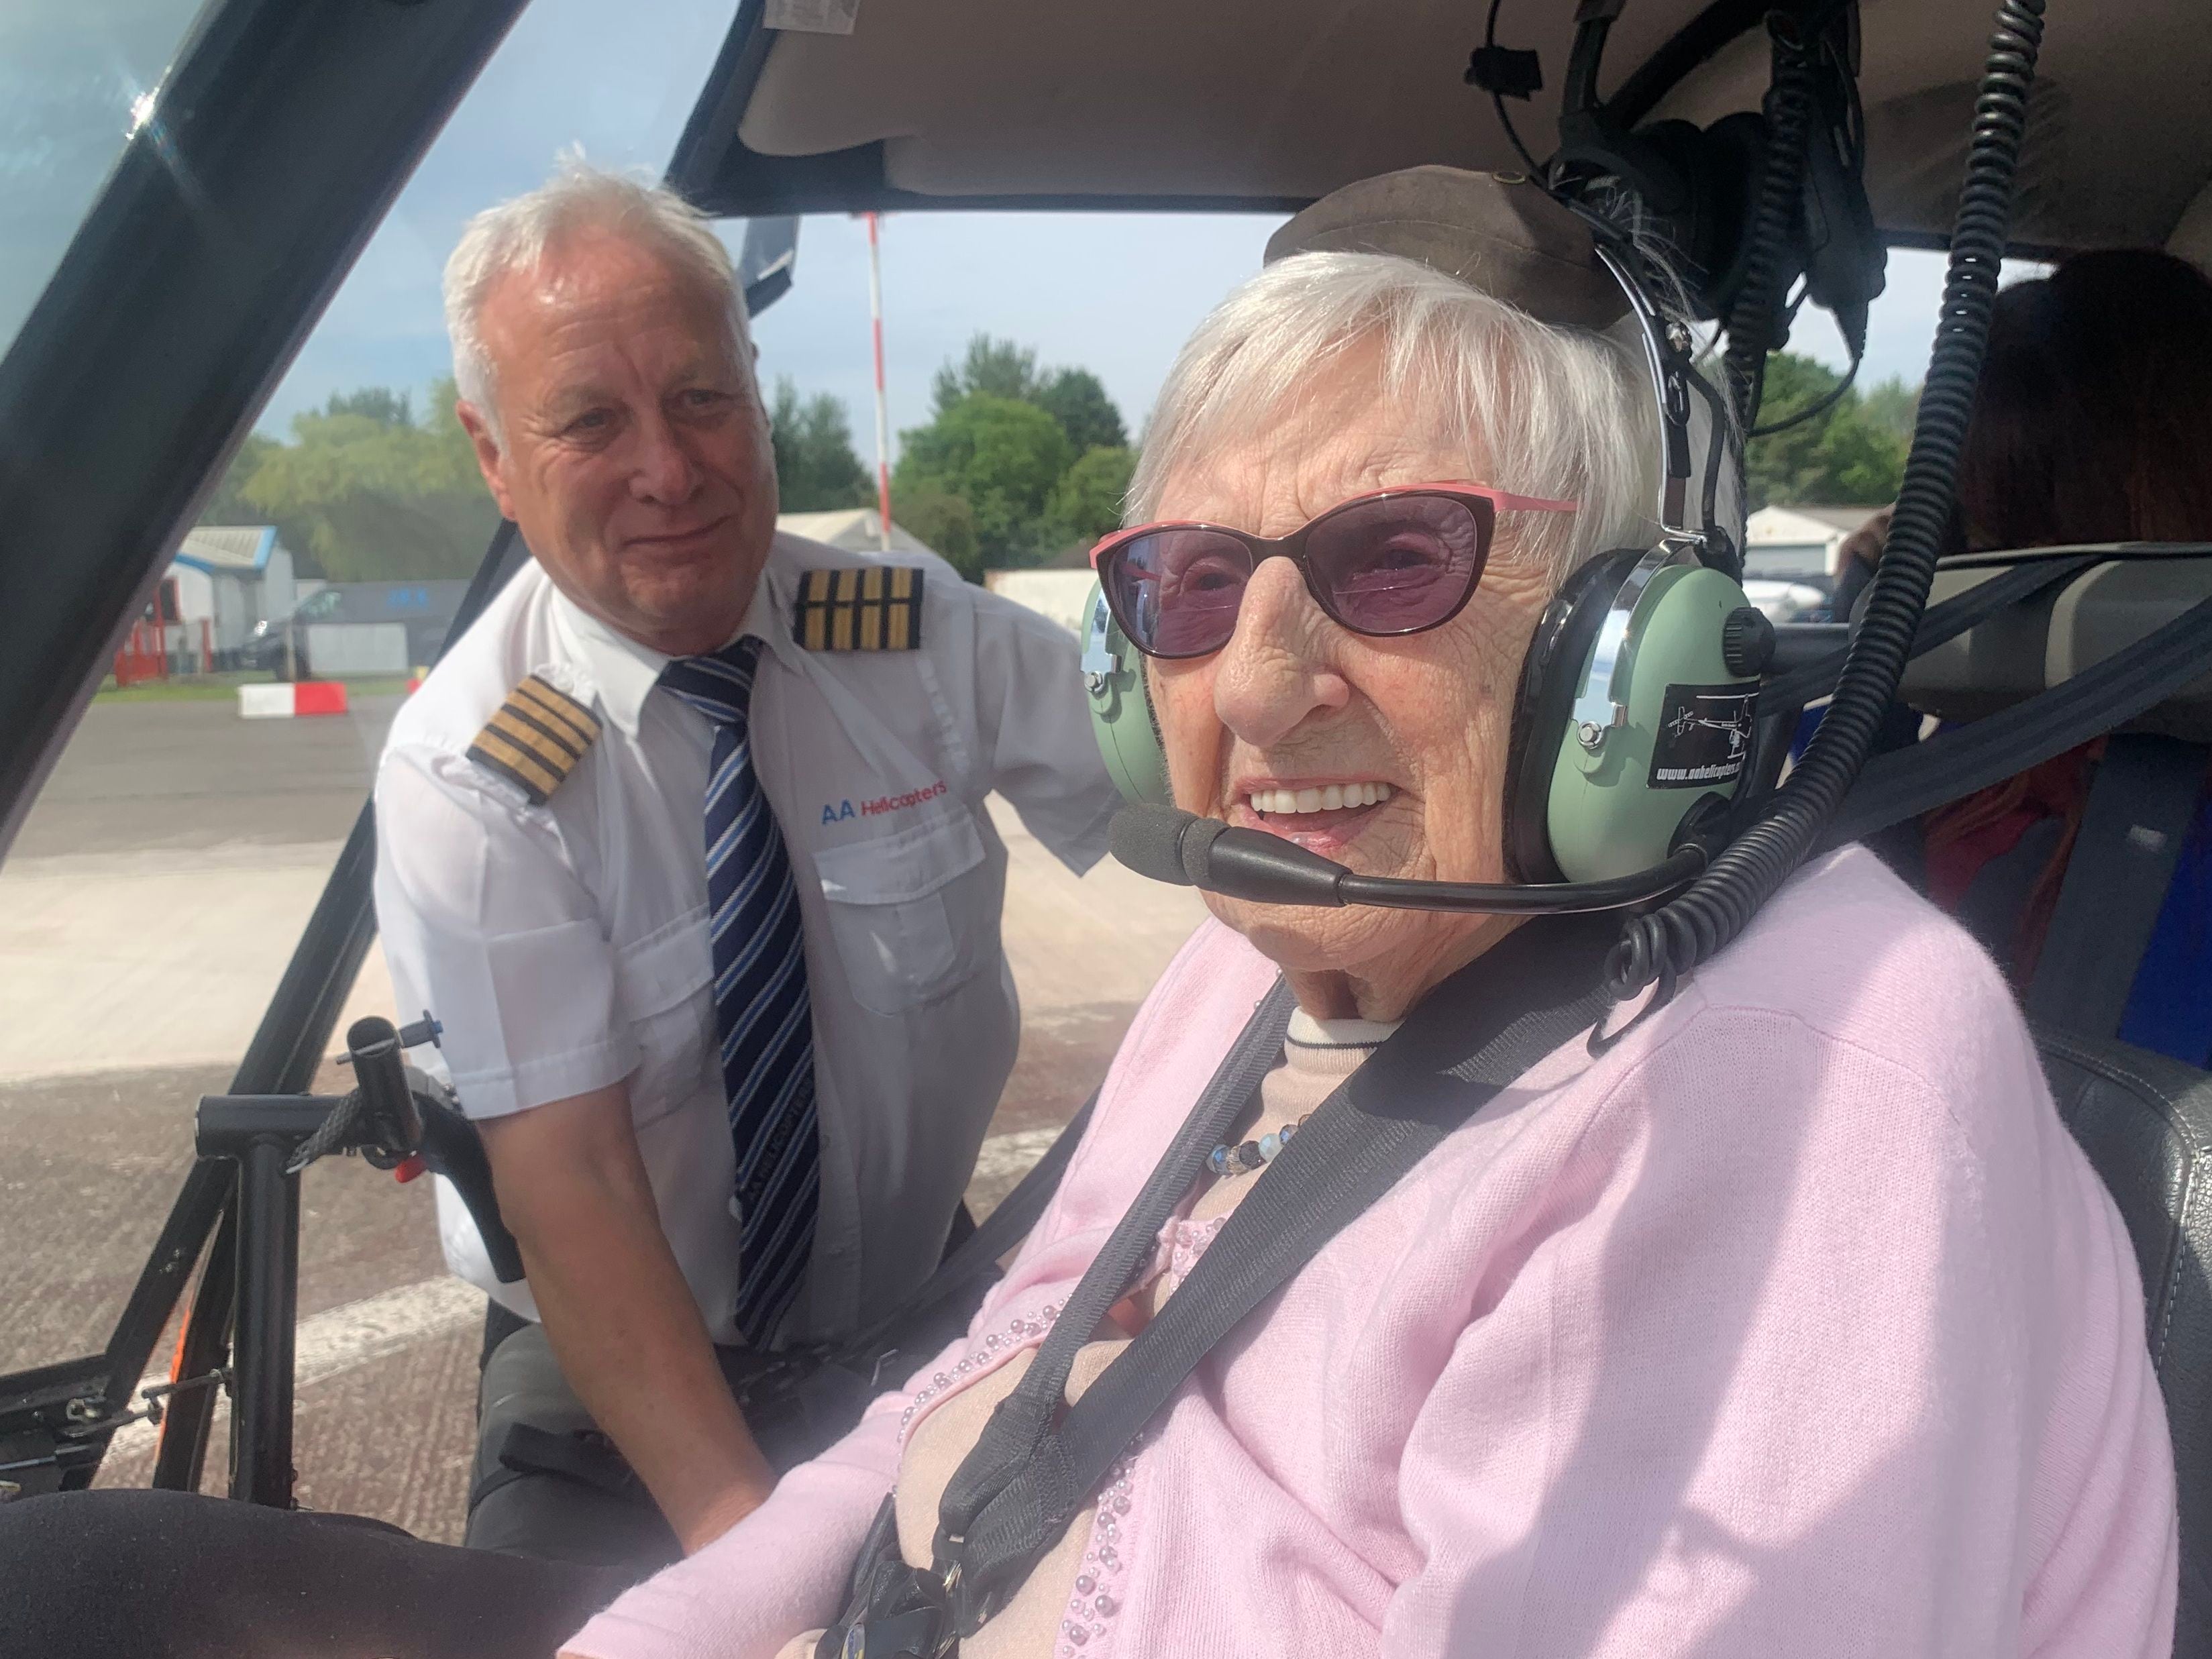 Watch: 'My dreams came true when I was surprised with a helicopter ride on my 97th birthday'